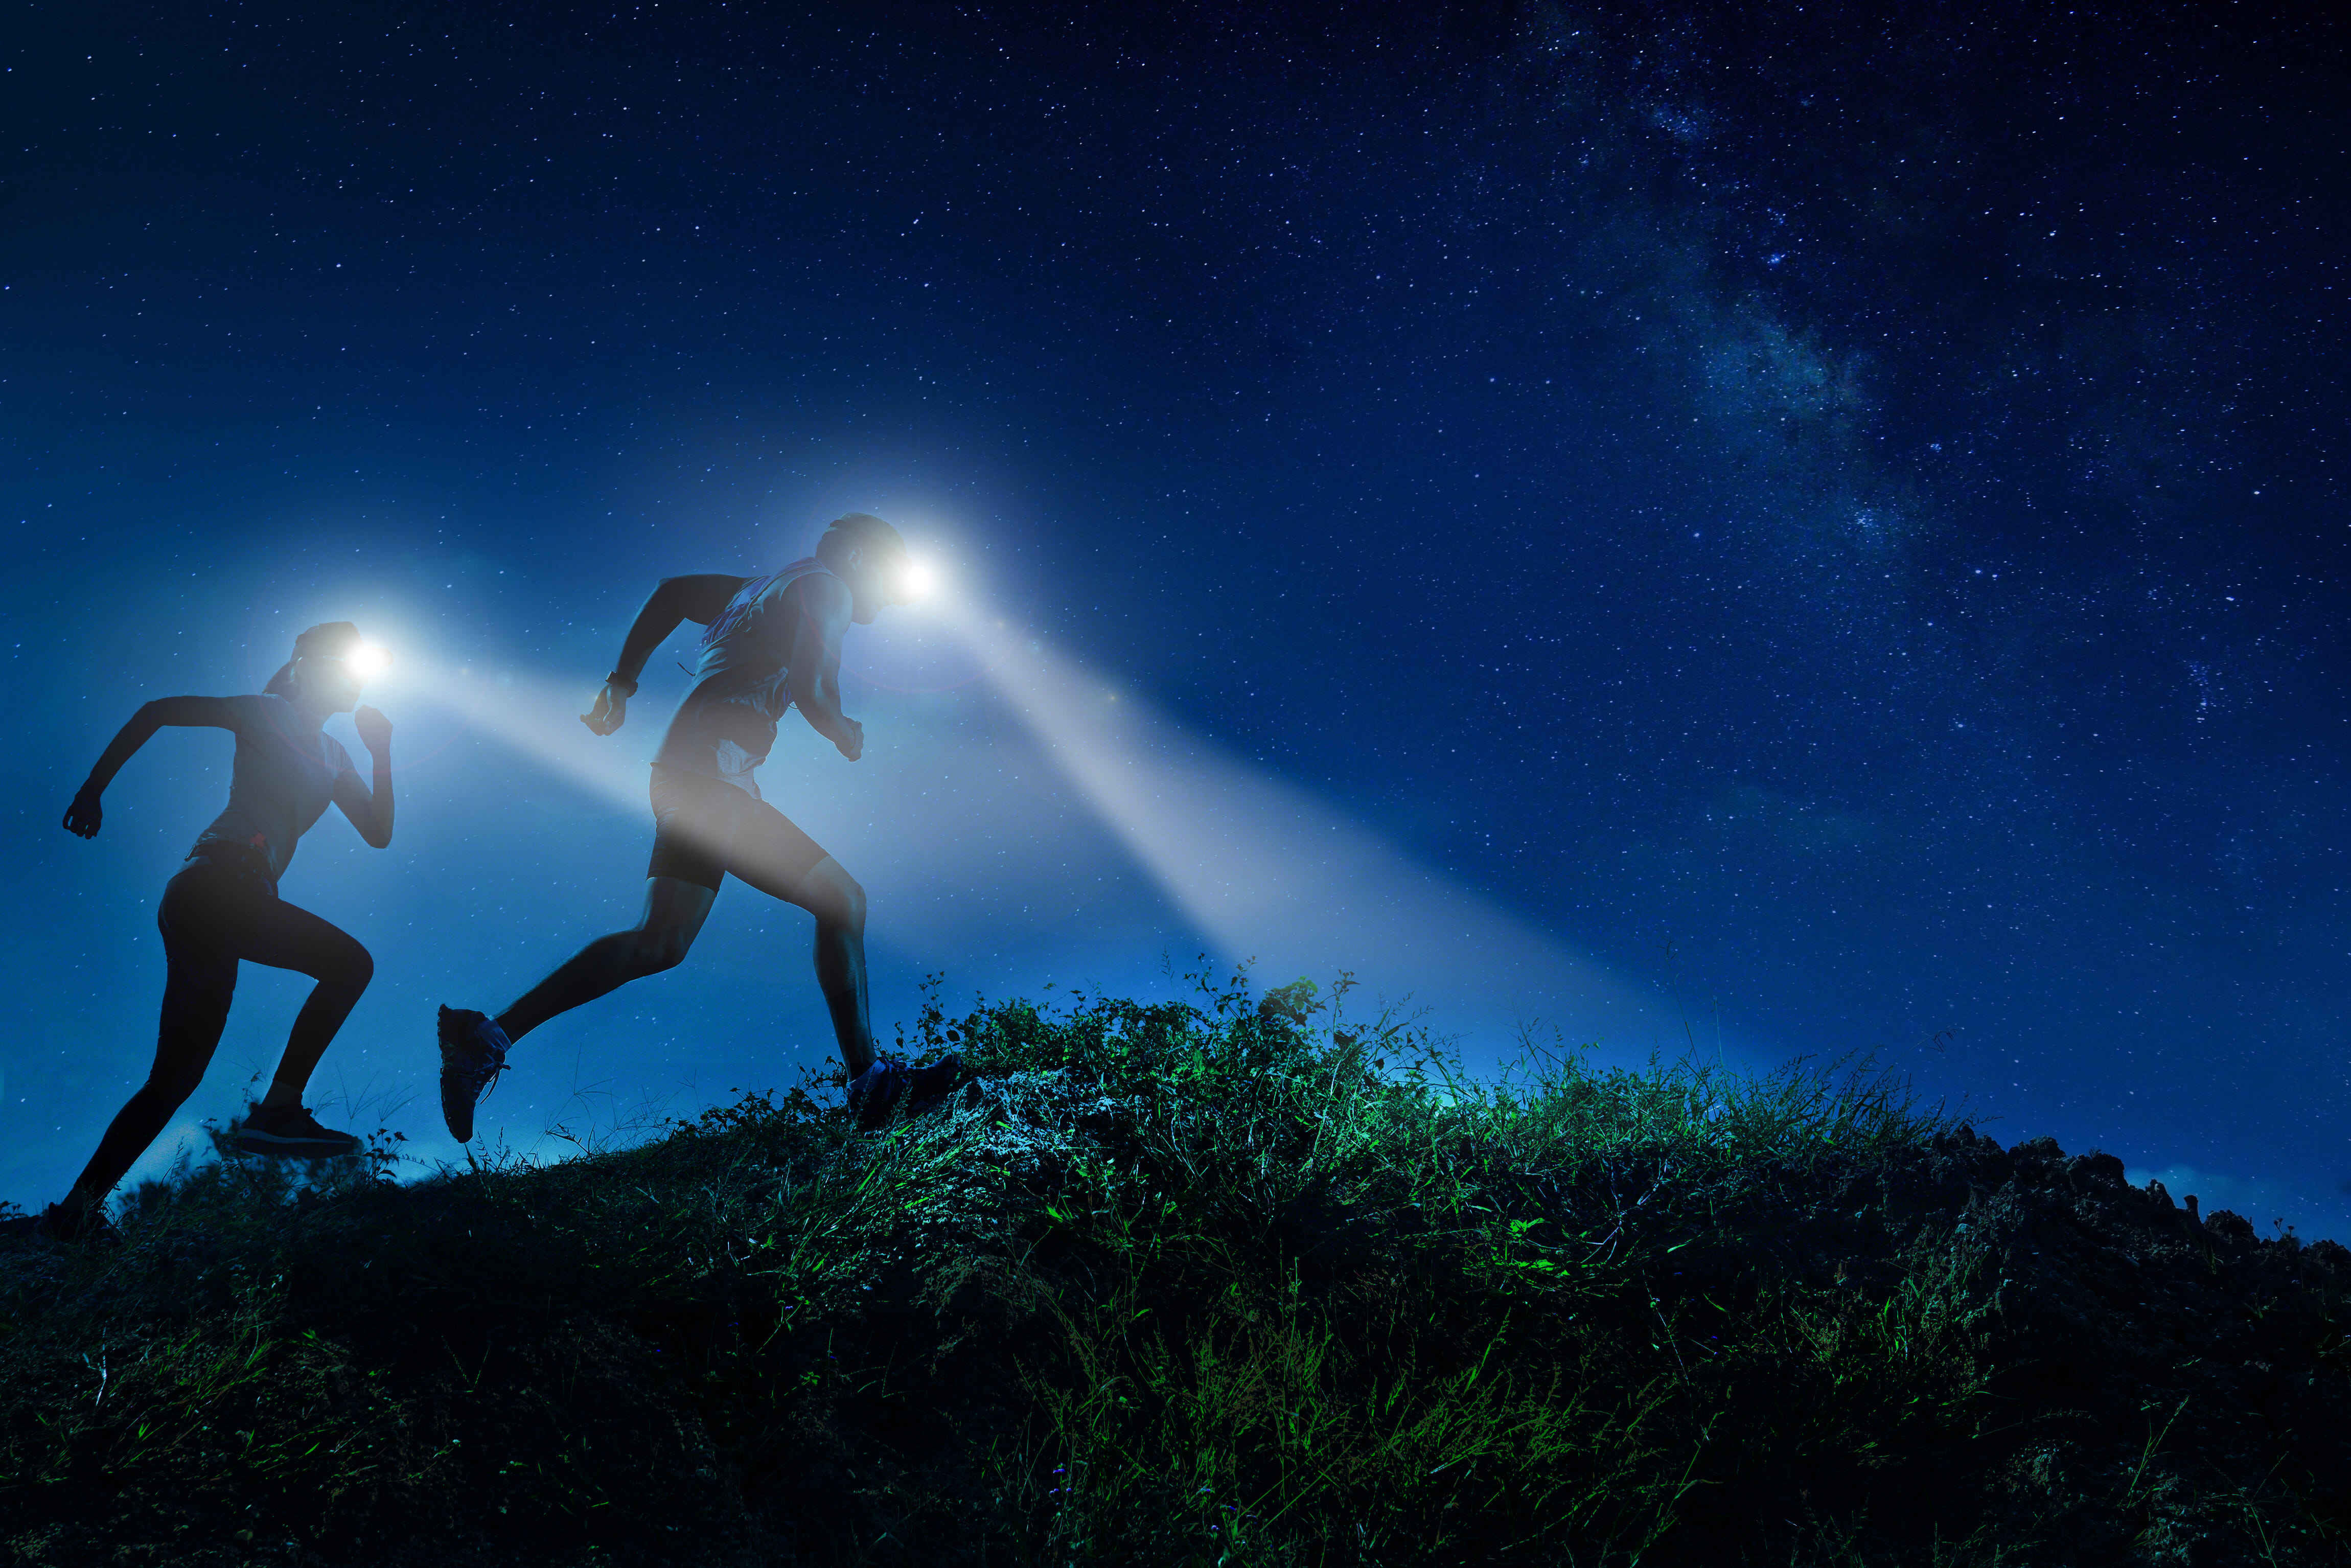 Running in the dark requires the right kit to stay safe